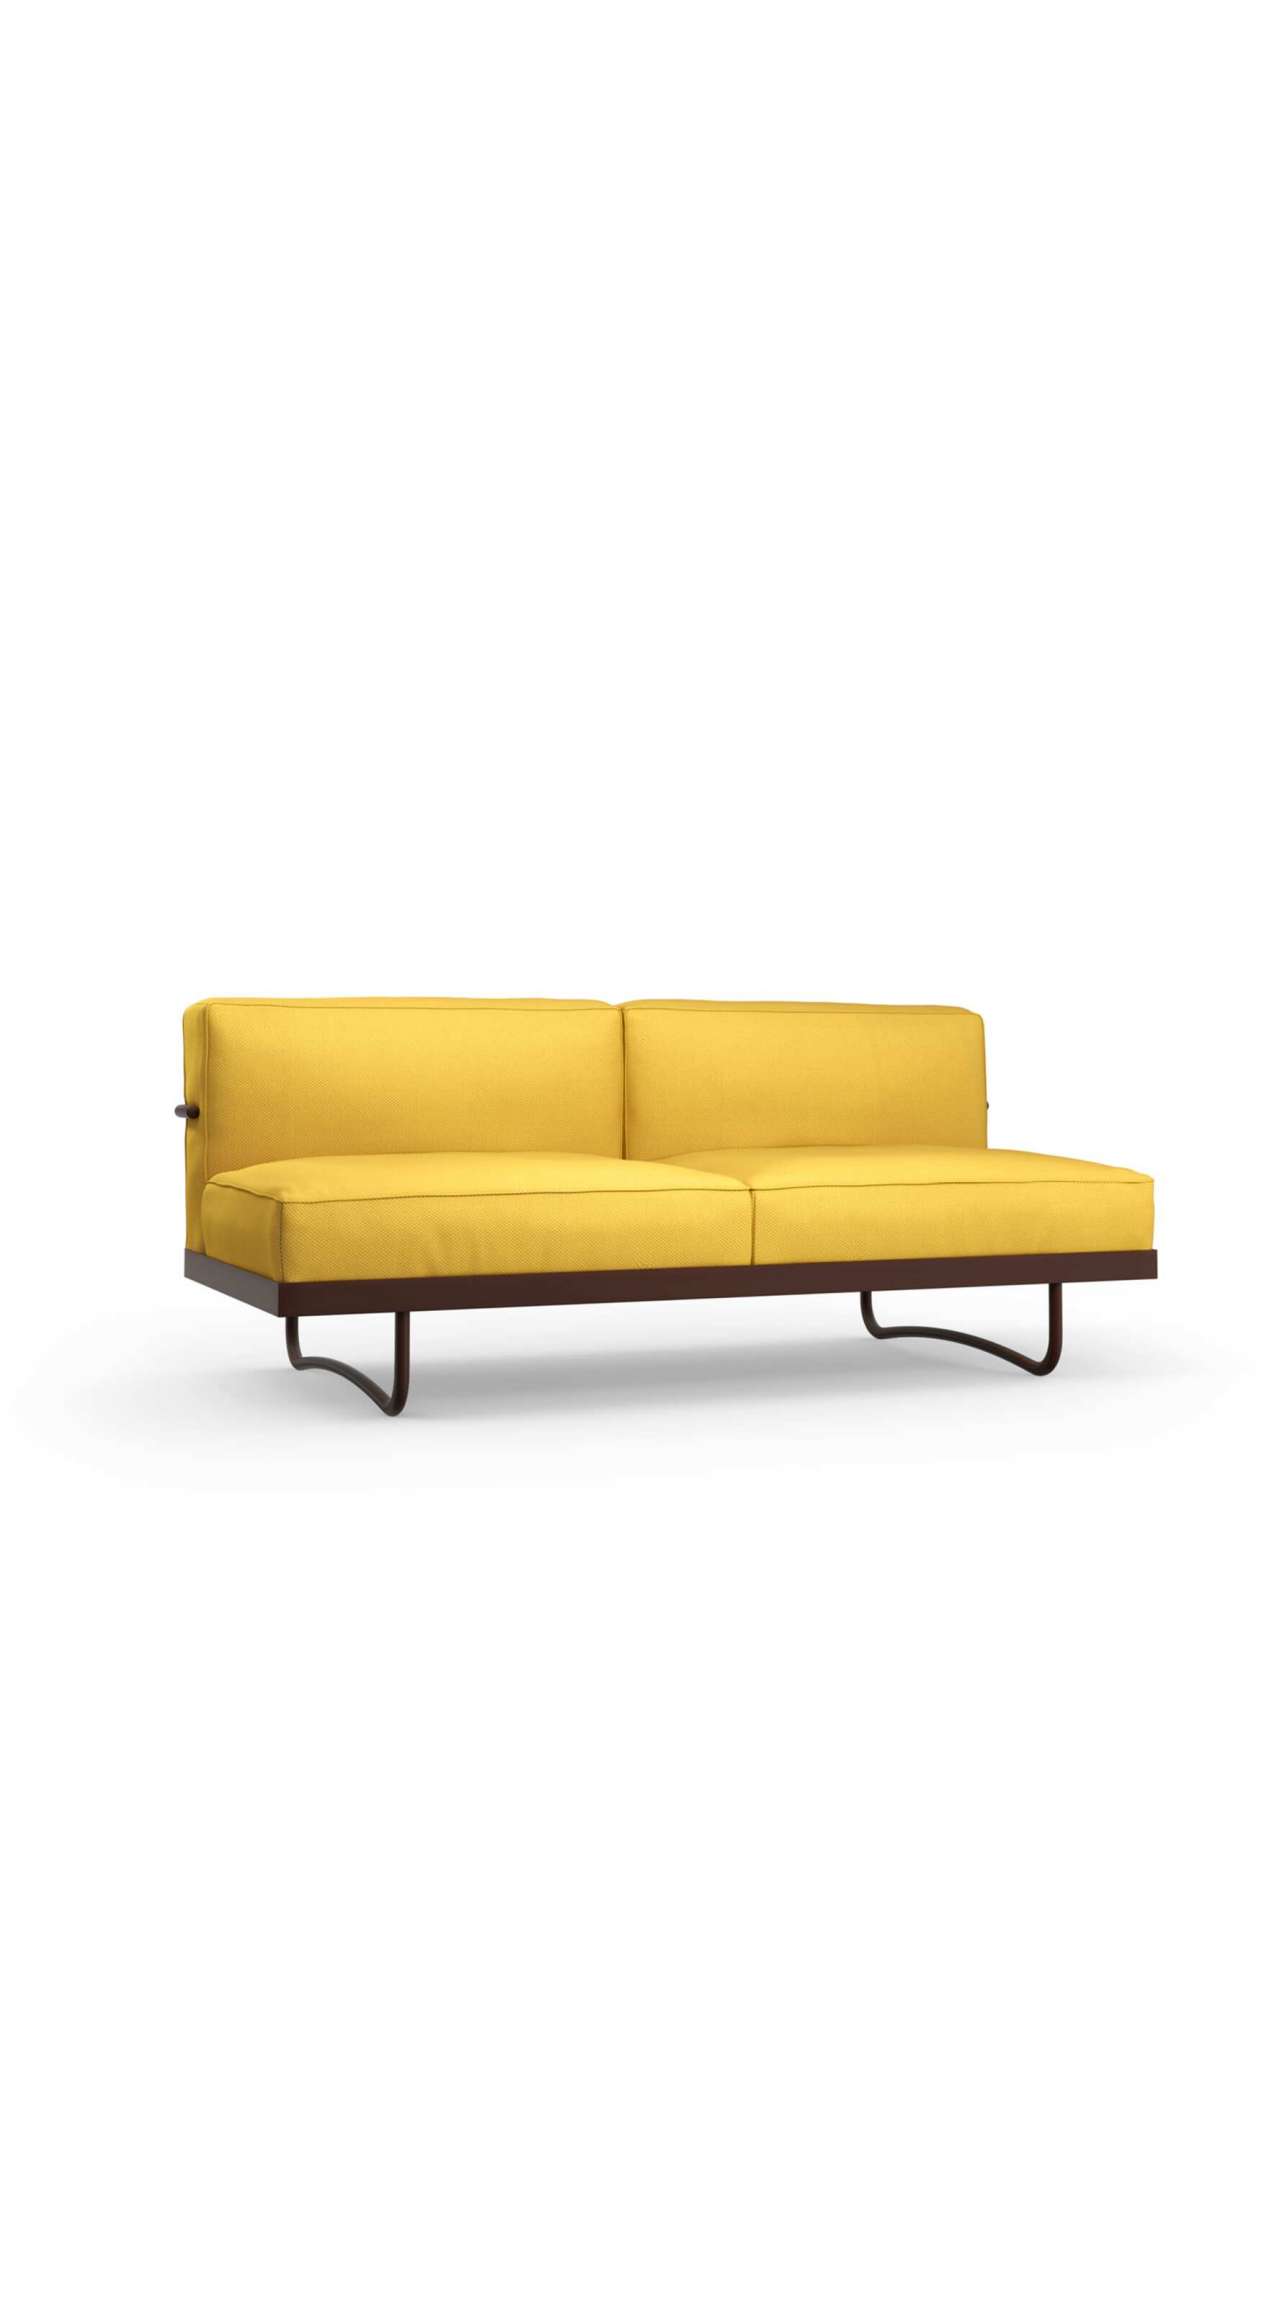 5 - Pro Sofa by Le Corbusier, Pierre Jeanneret, Charlotte Perriand | Cassina